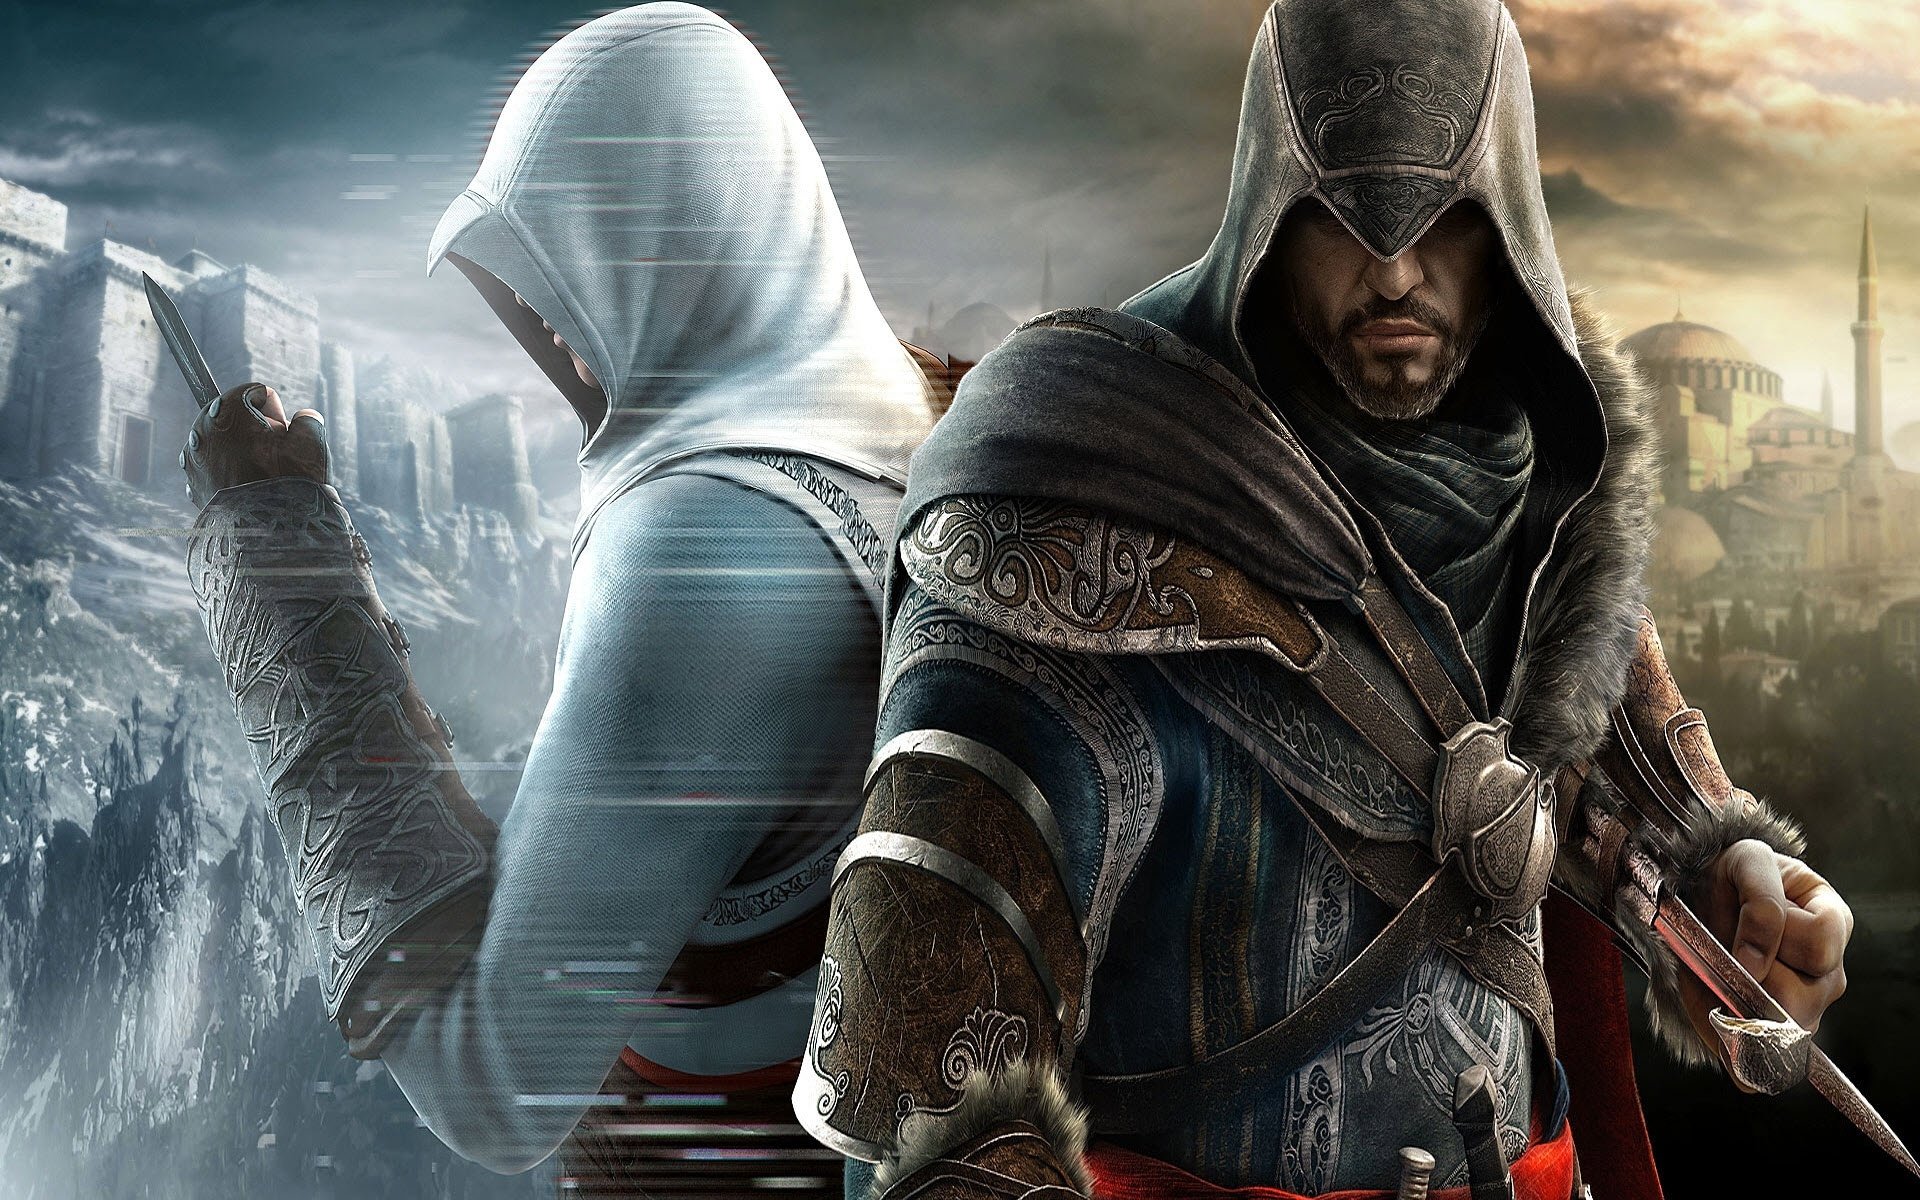 assassins creed revelations wallpapers Wallpapers